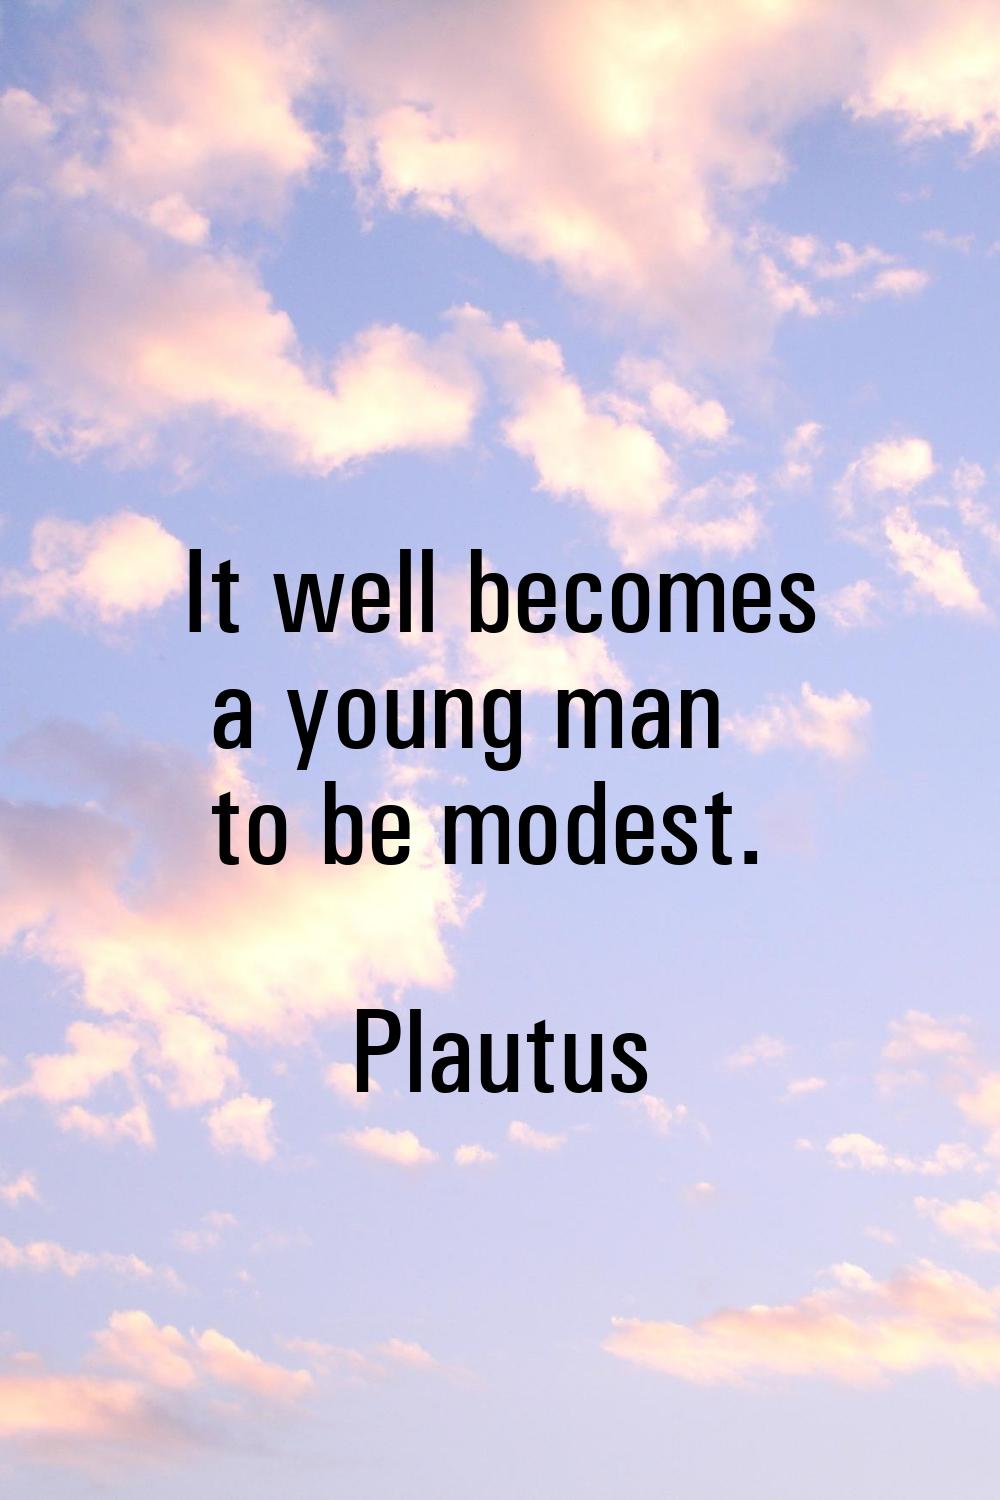 It well becomes a young man to be modest.